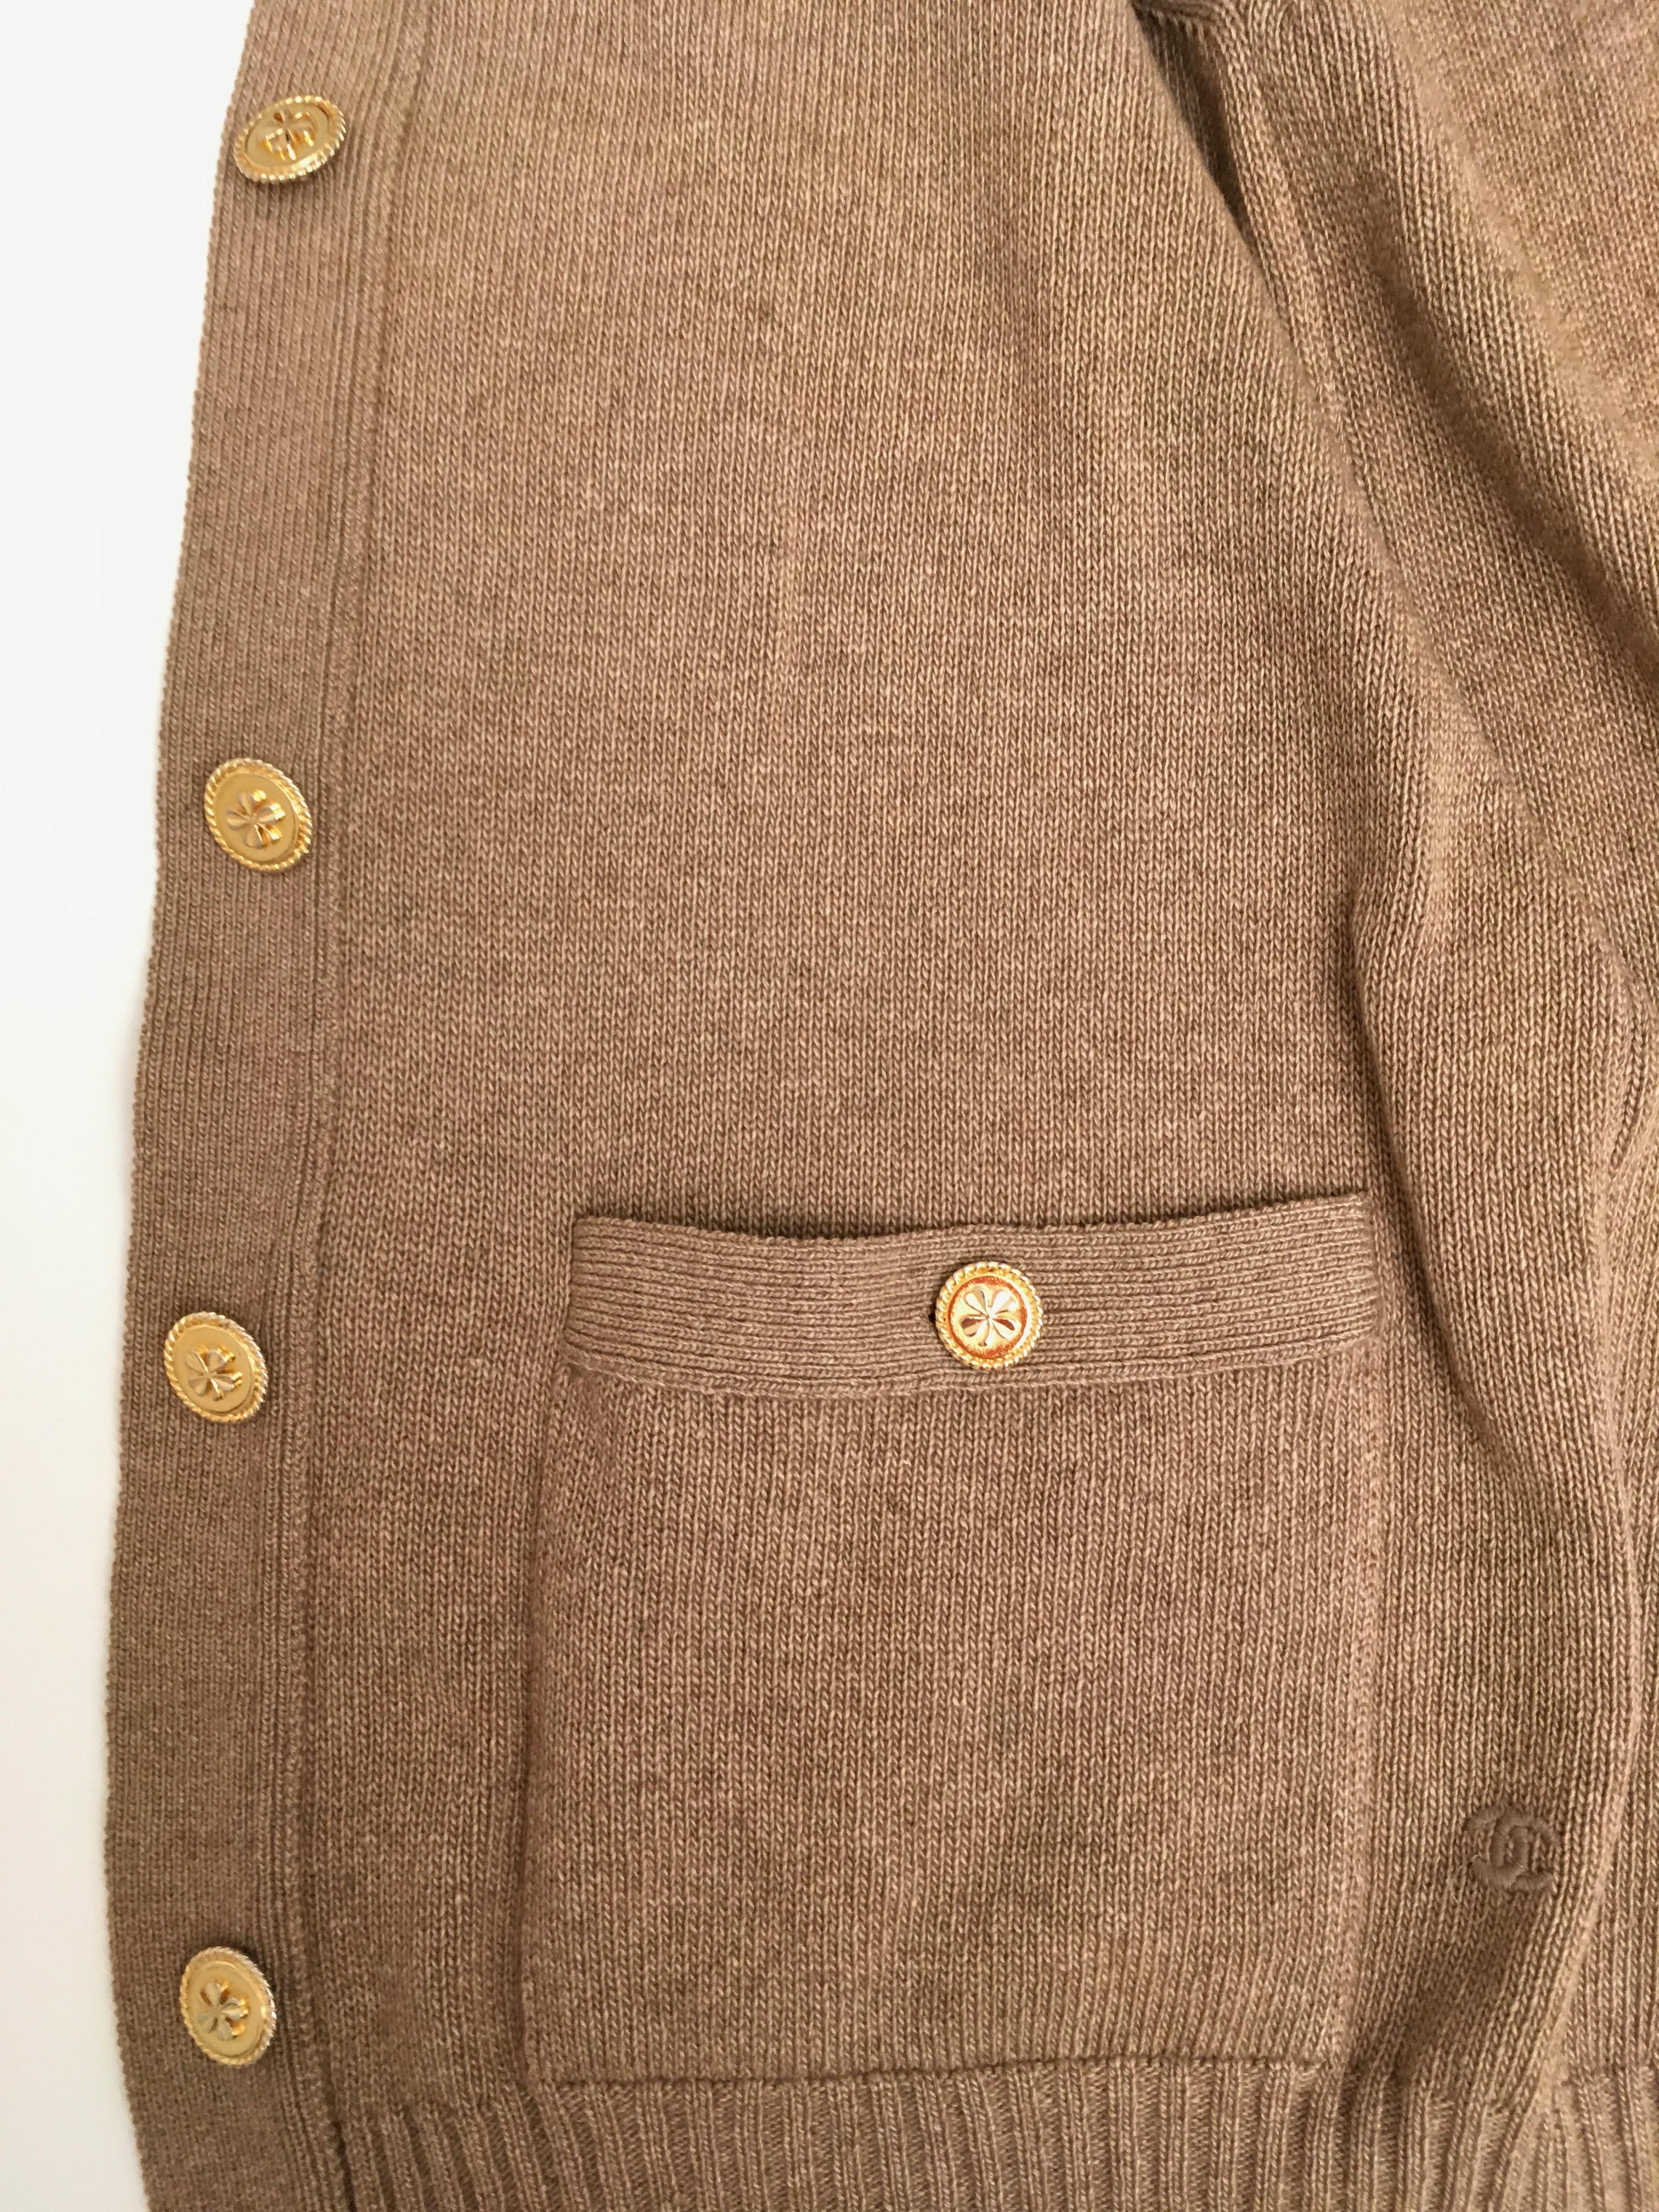 Brown Vintage Chanel Cardigan Sweater... Cashmere Timeless Classic For Sale